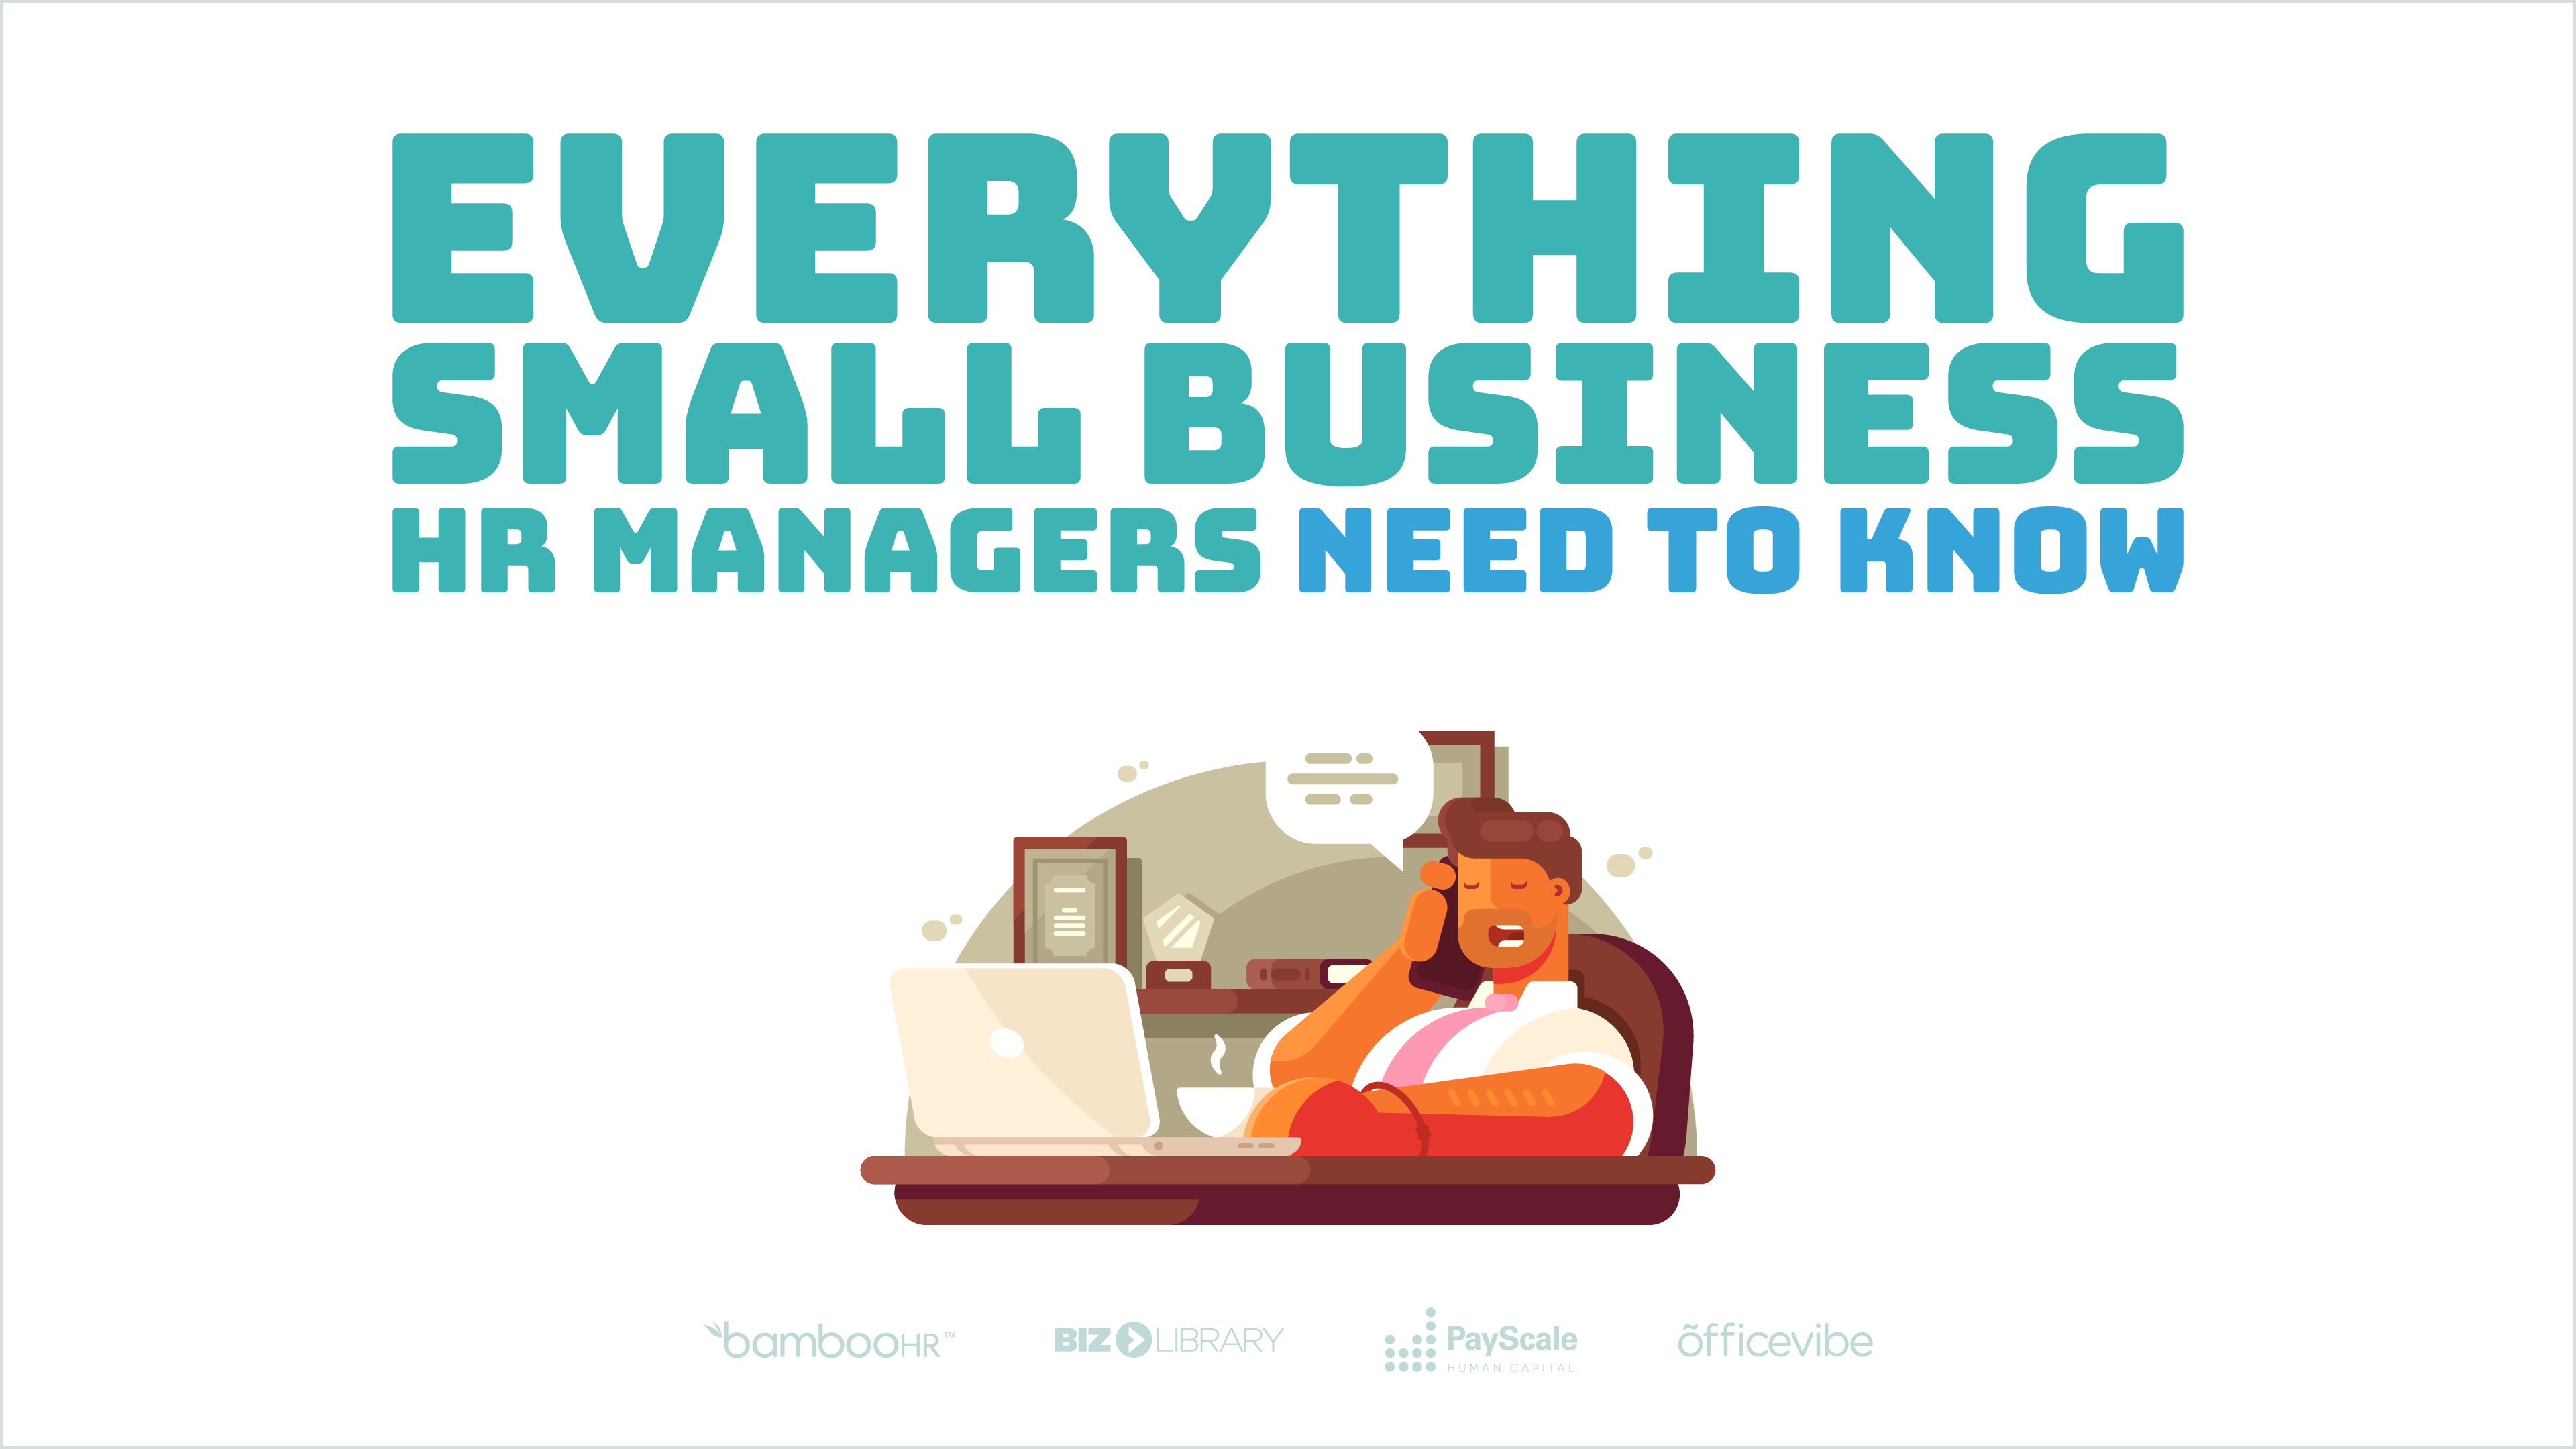 Everything Small Business HR Managers Need to Know